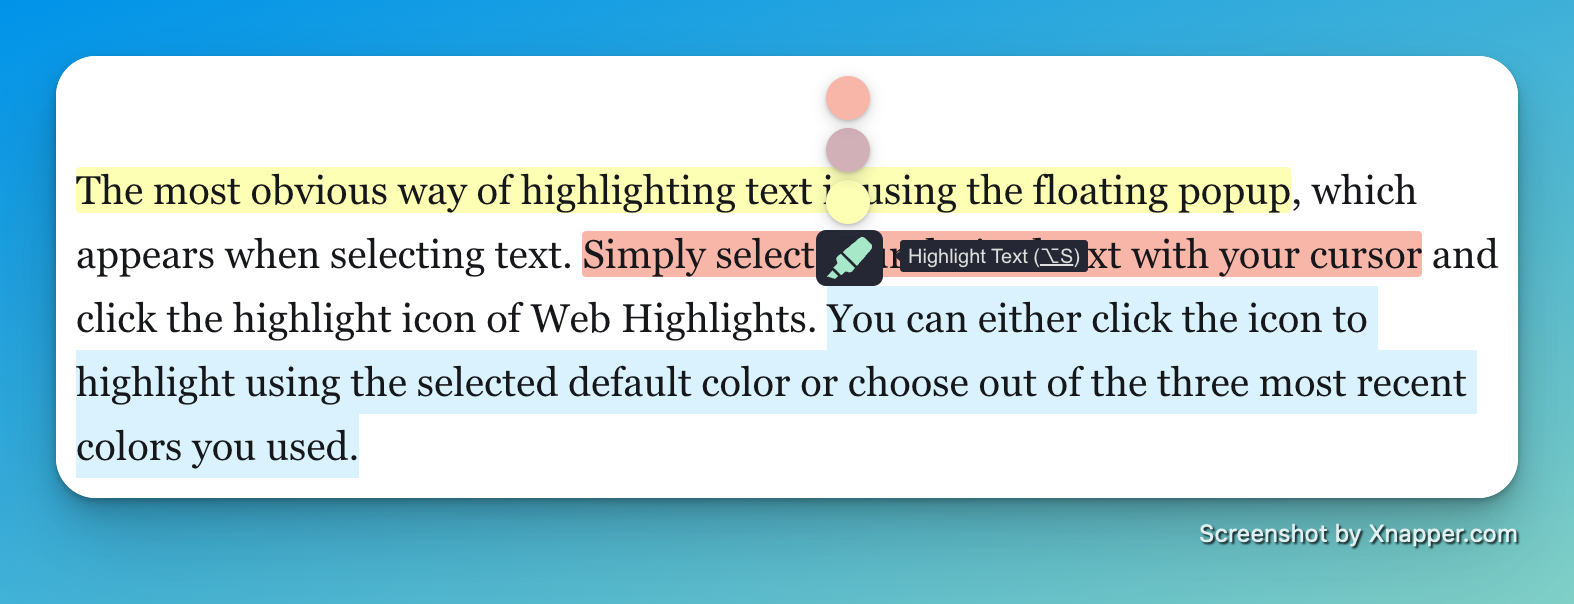 Highlighting with the PDF & Web Highlighter Chrome extension